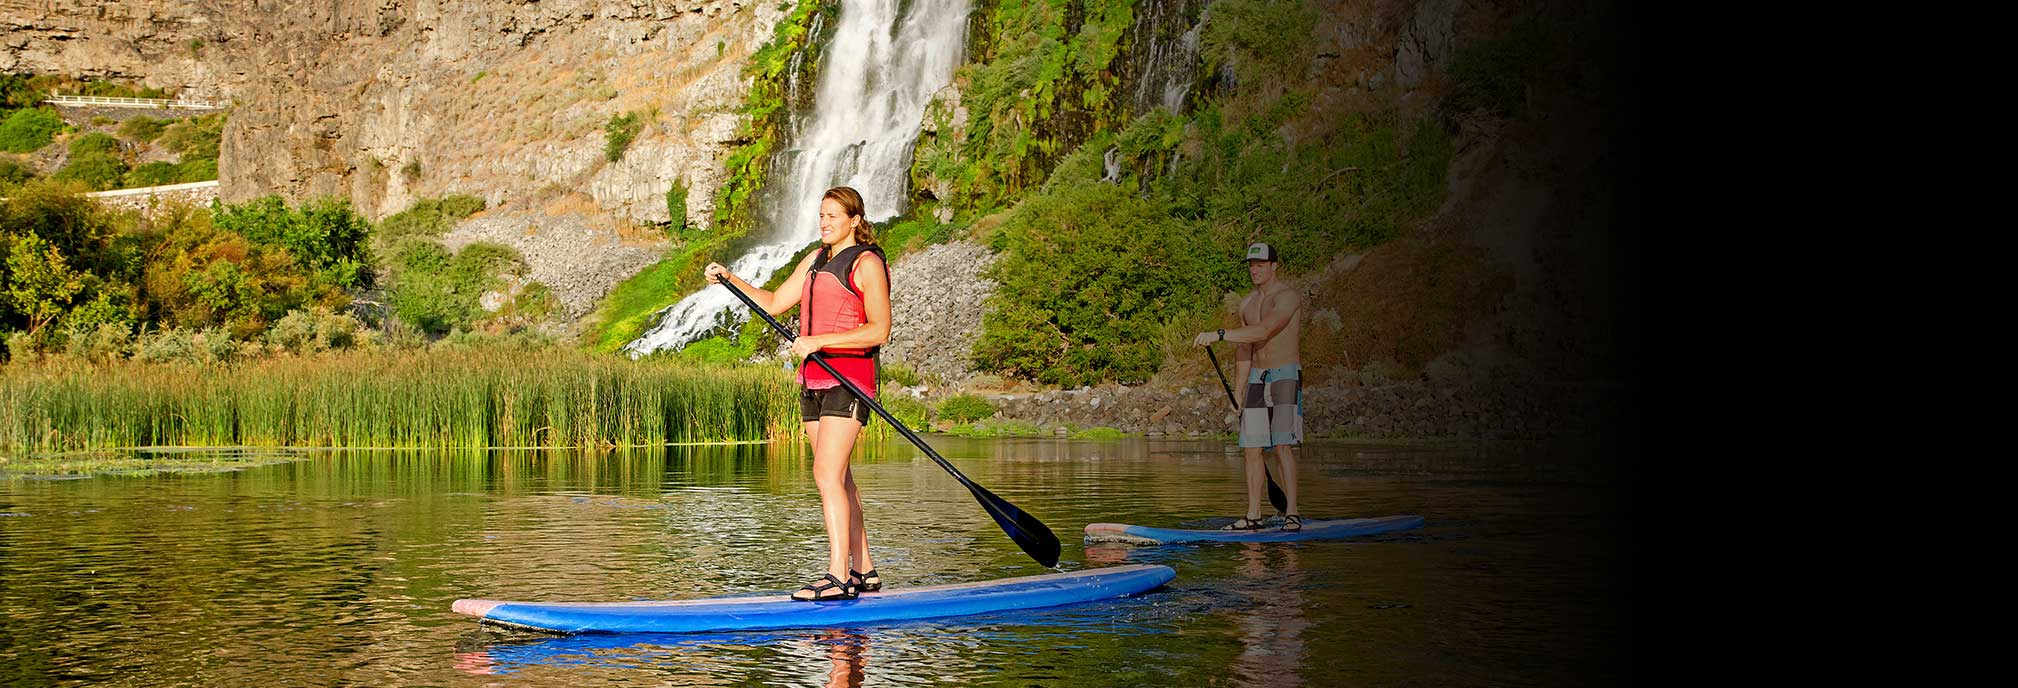 Thousand-springs-paddle-boarding-header